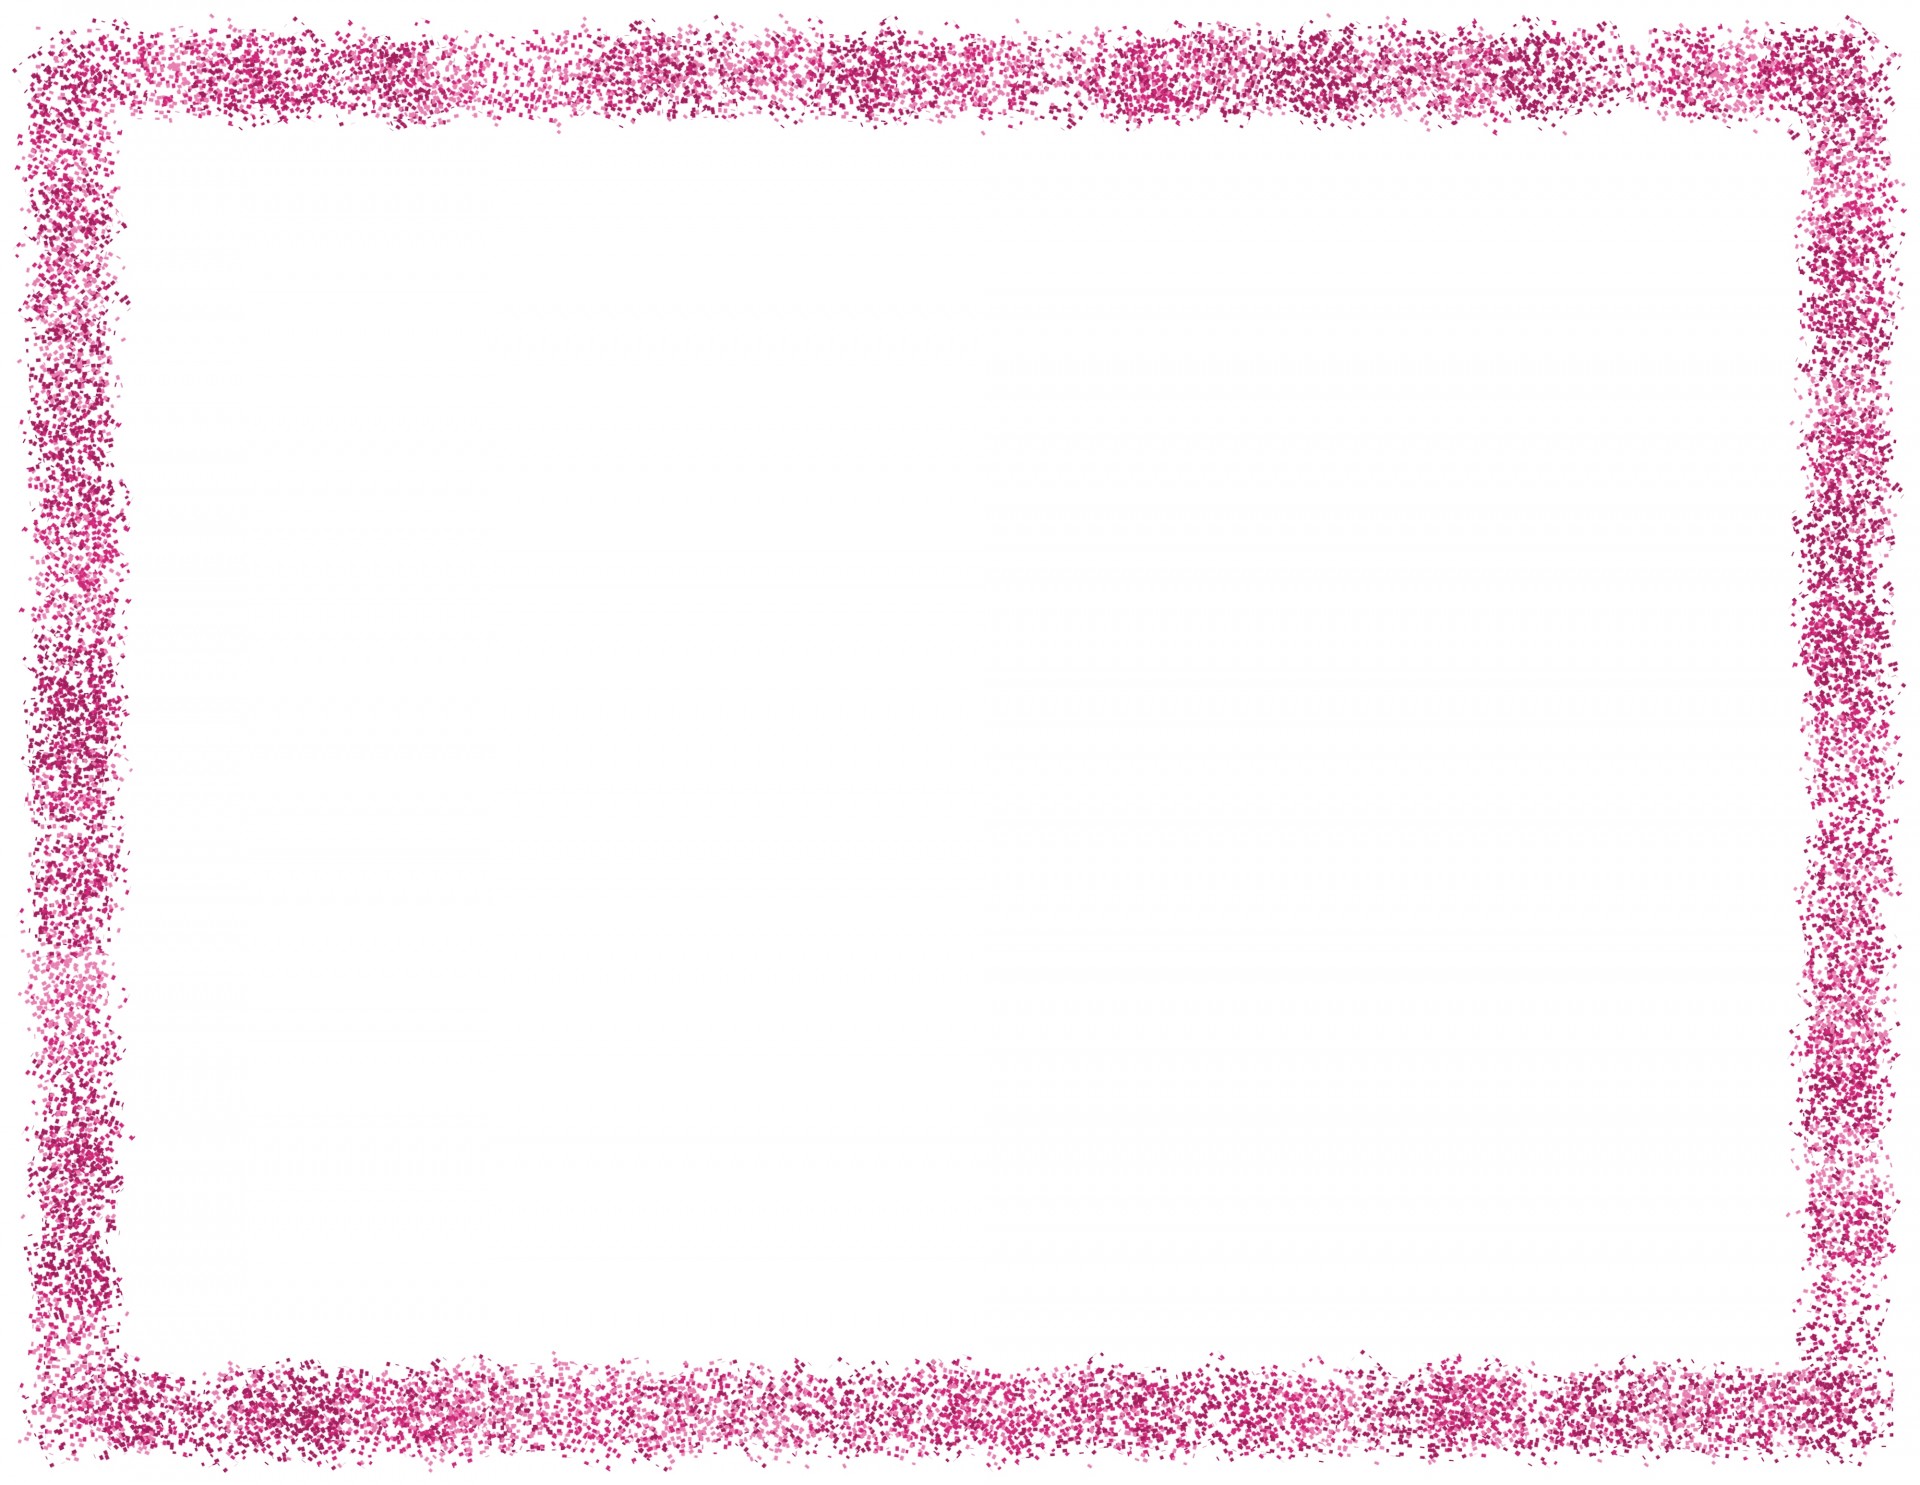 template frame background free photo